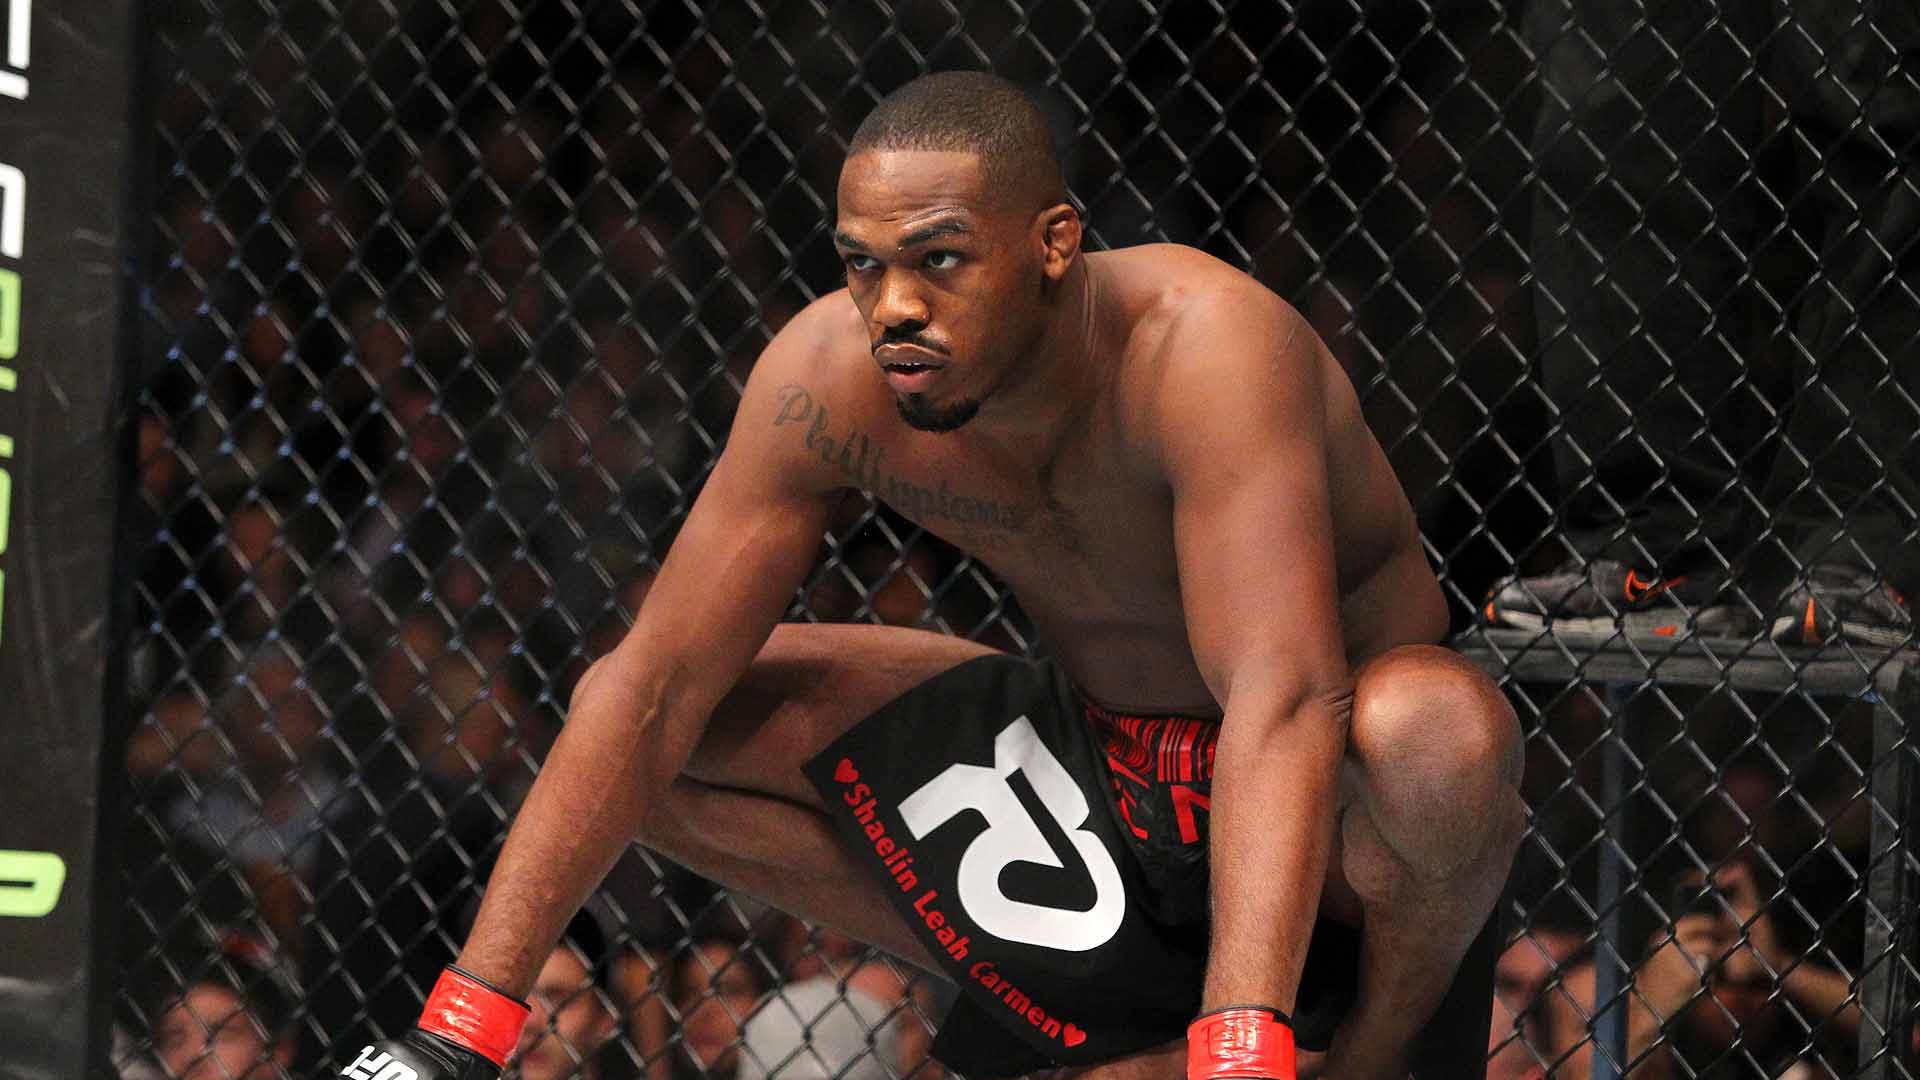 Jon Jones Wants to Become an Actor, Looking to Emulate The Rock